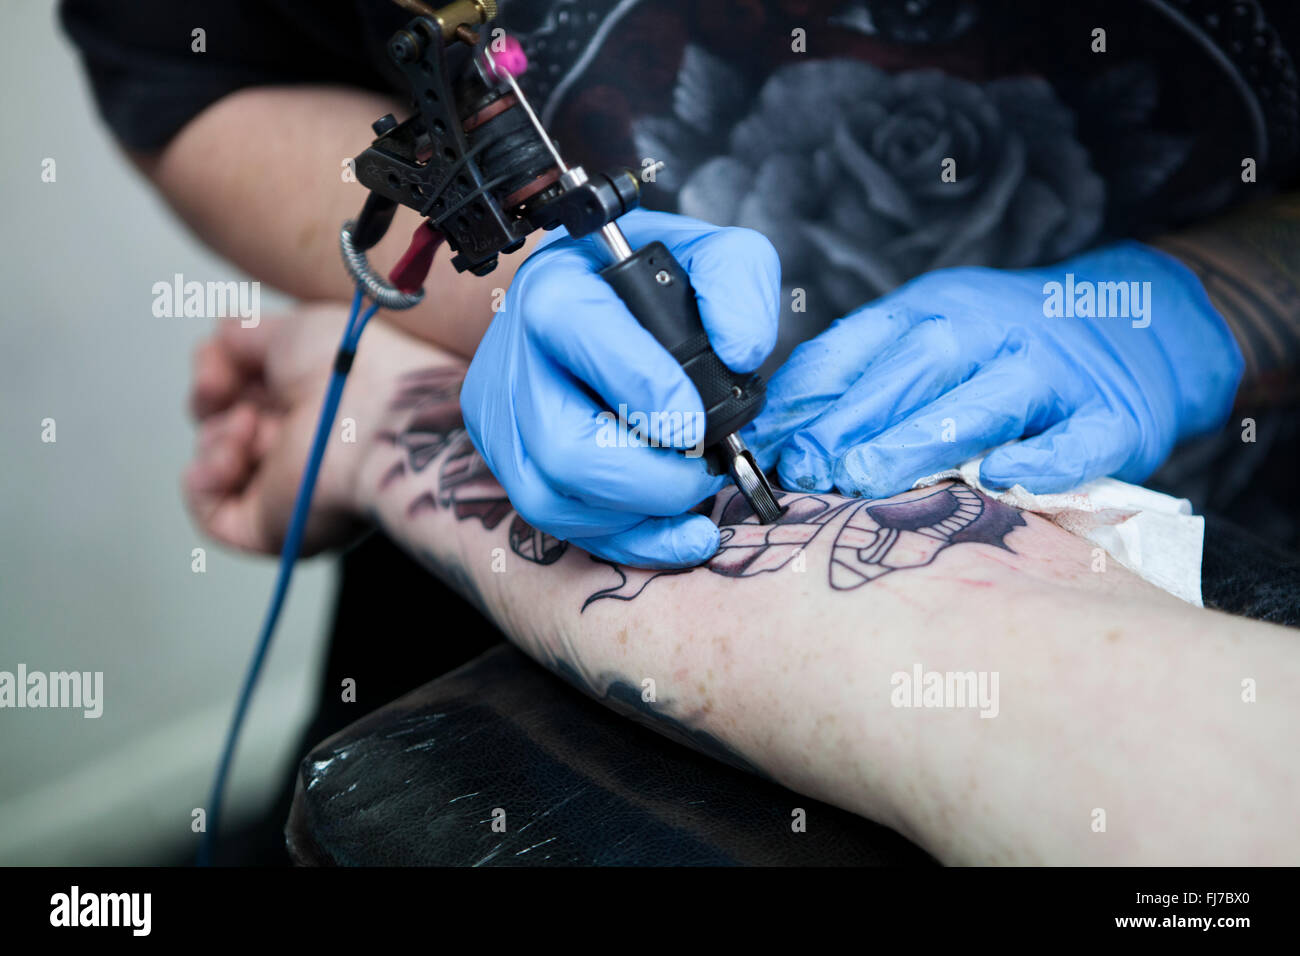 Tattoo artist wearing blue latex gloves tattoos a bio-mechanical images on  clients arm Stock Photo - Alamy